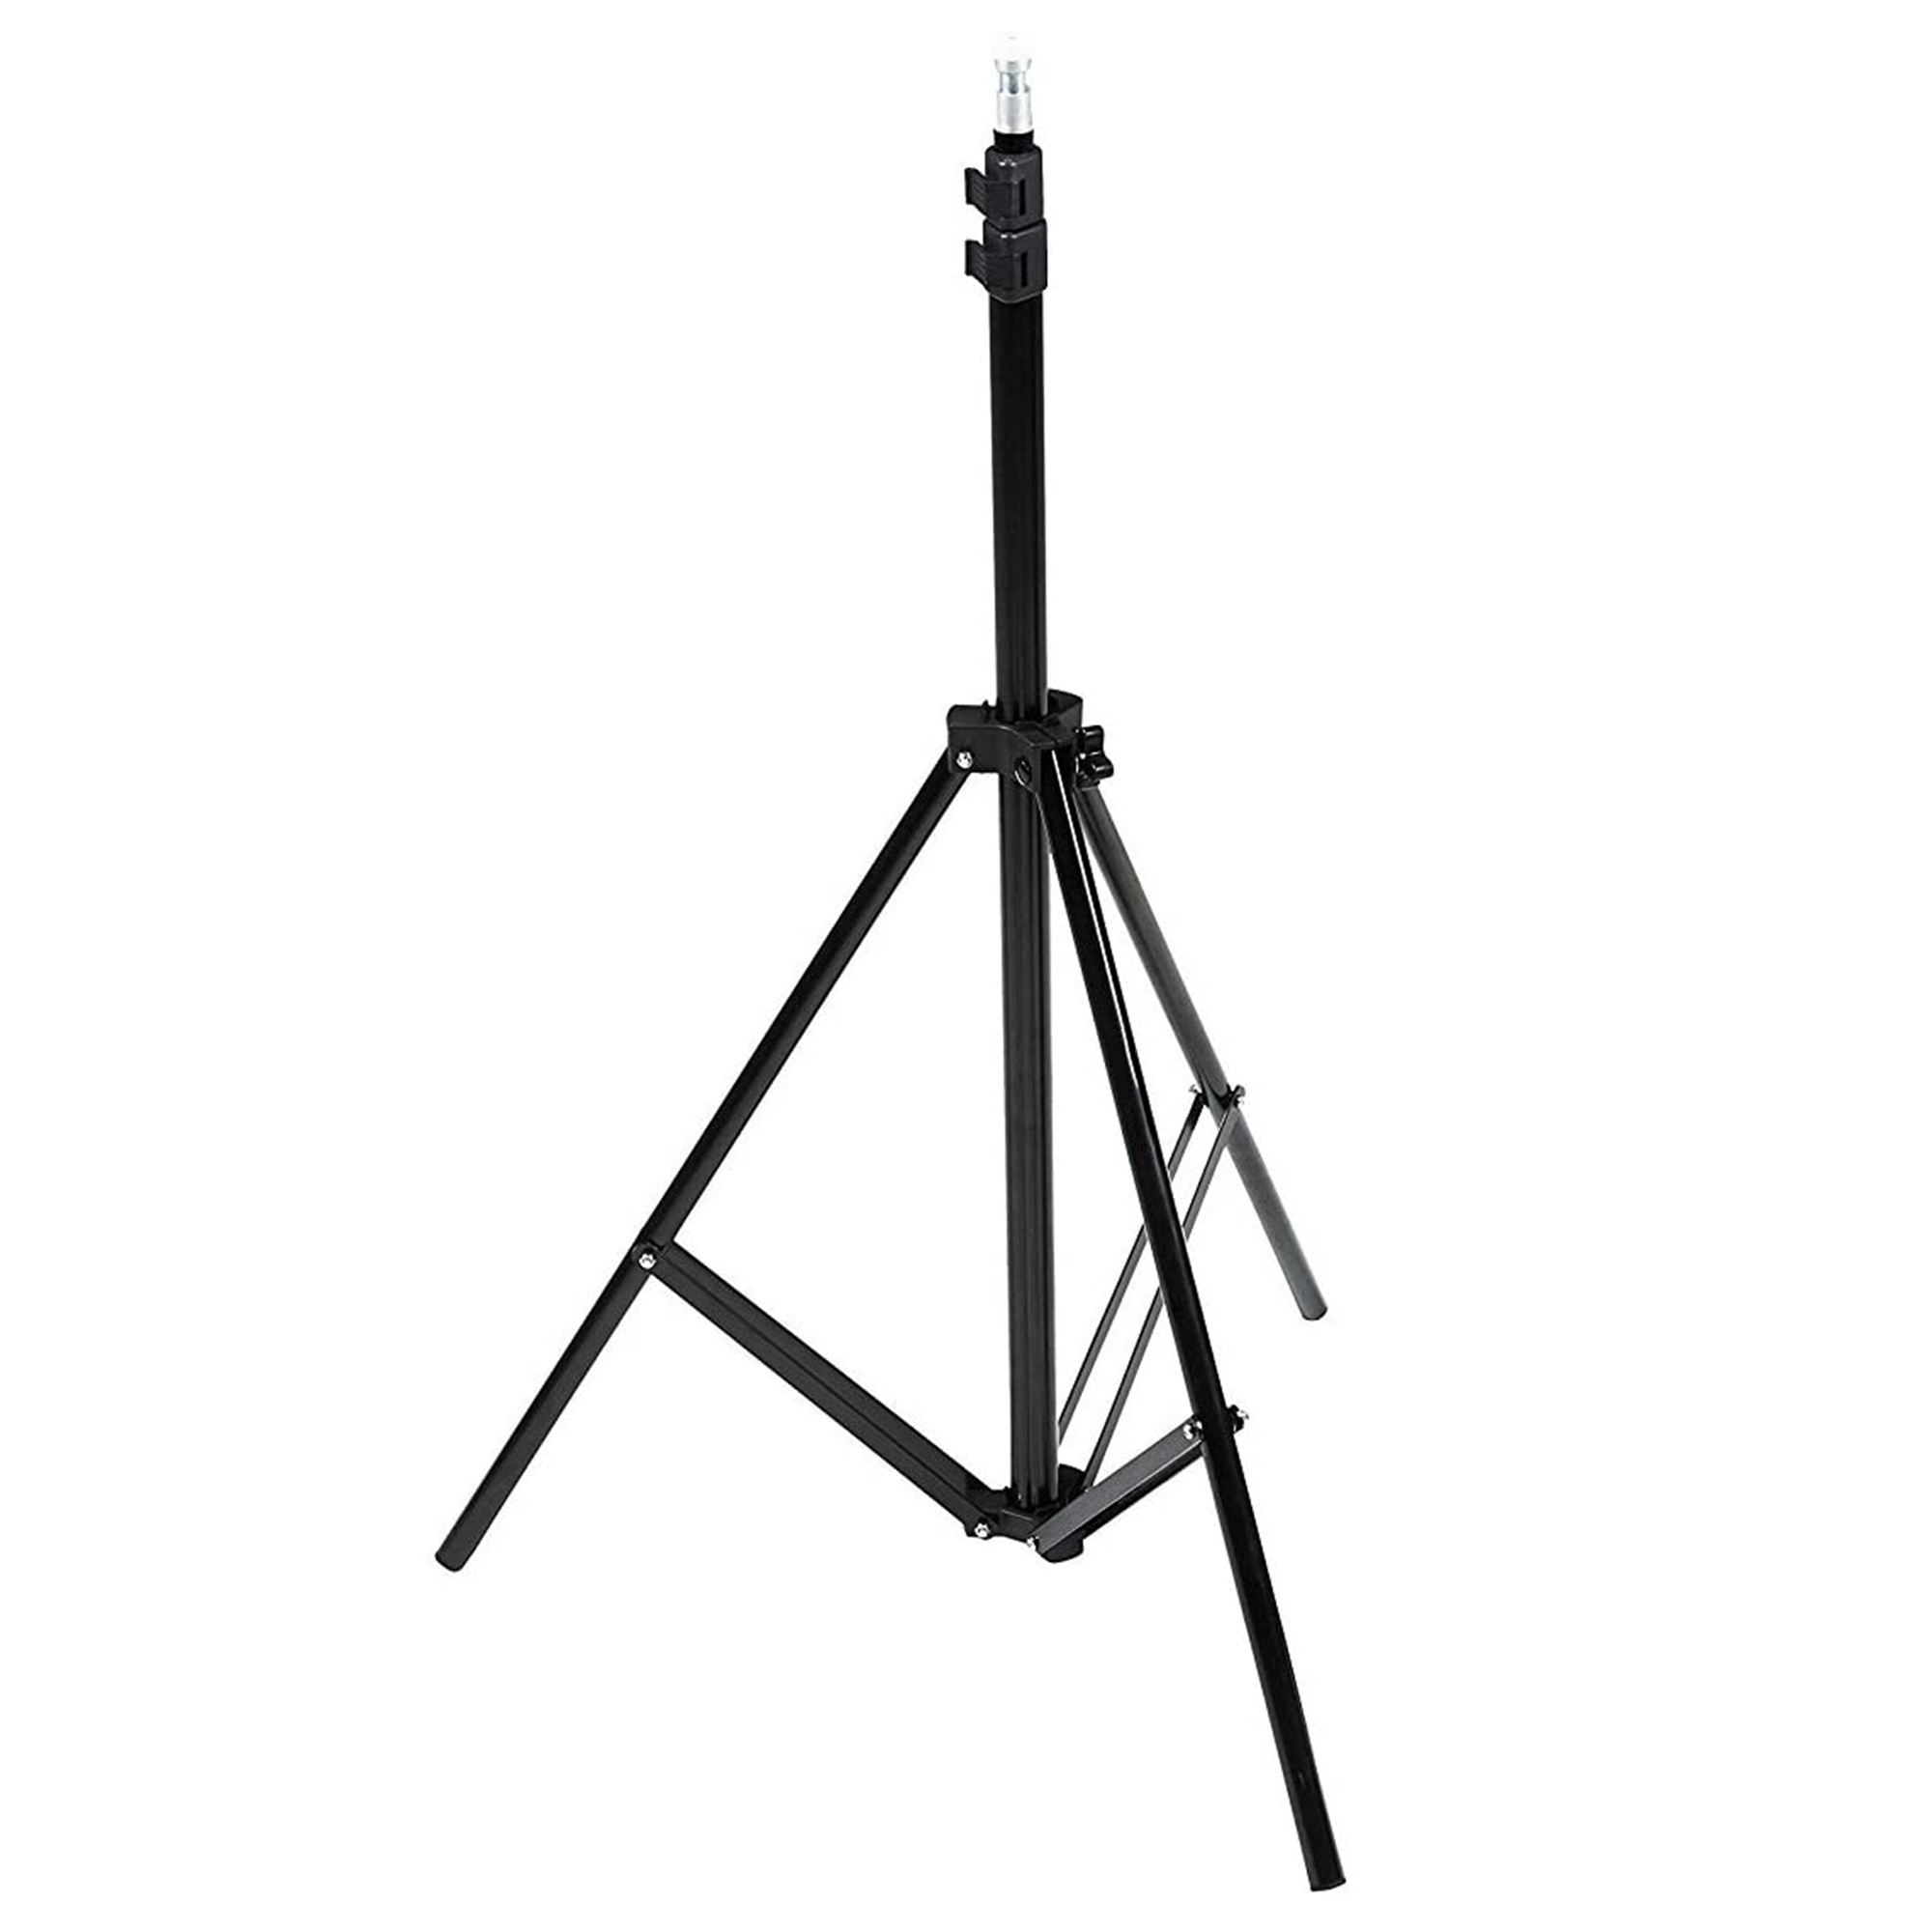 Aluminum Light Photography Tripod Stand with Case - 2.8 - 6.7 Feet, Black